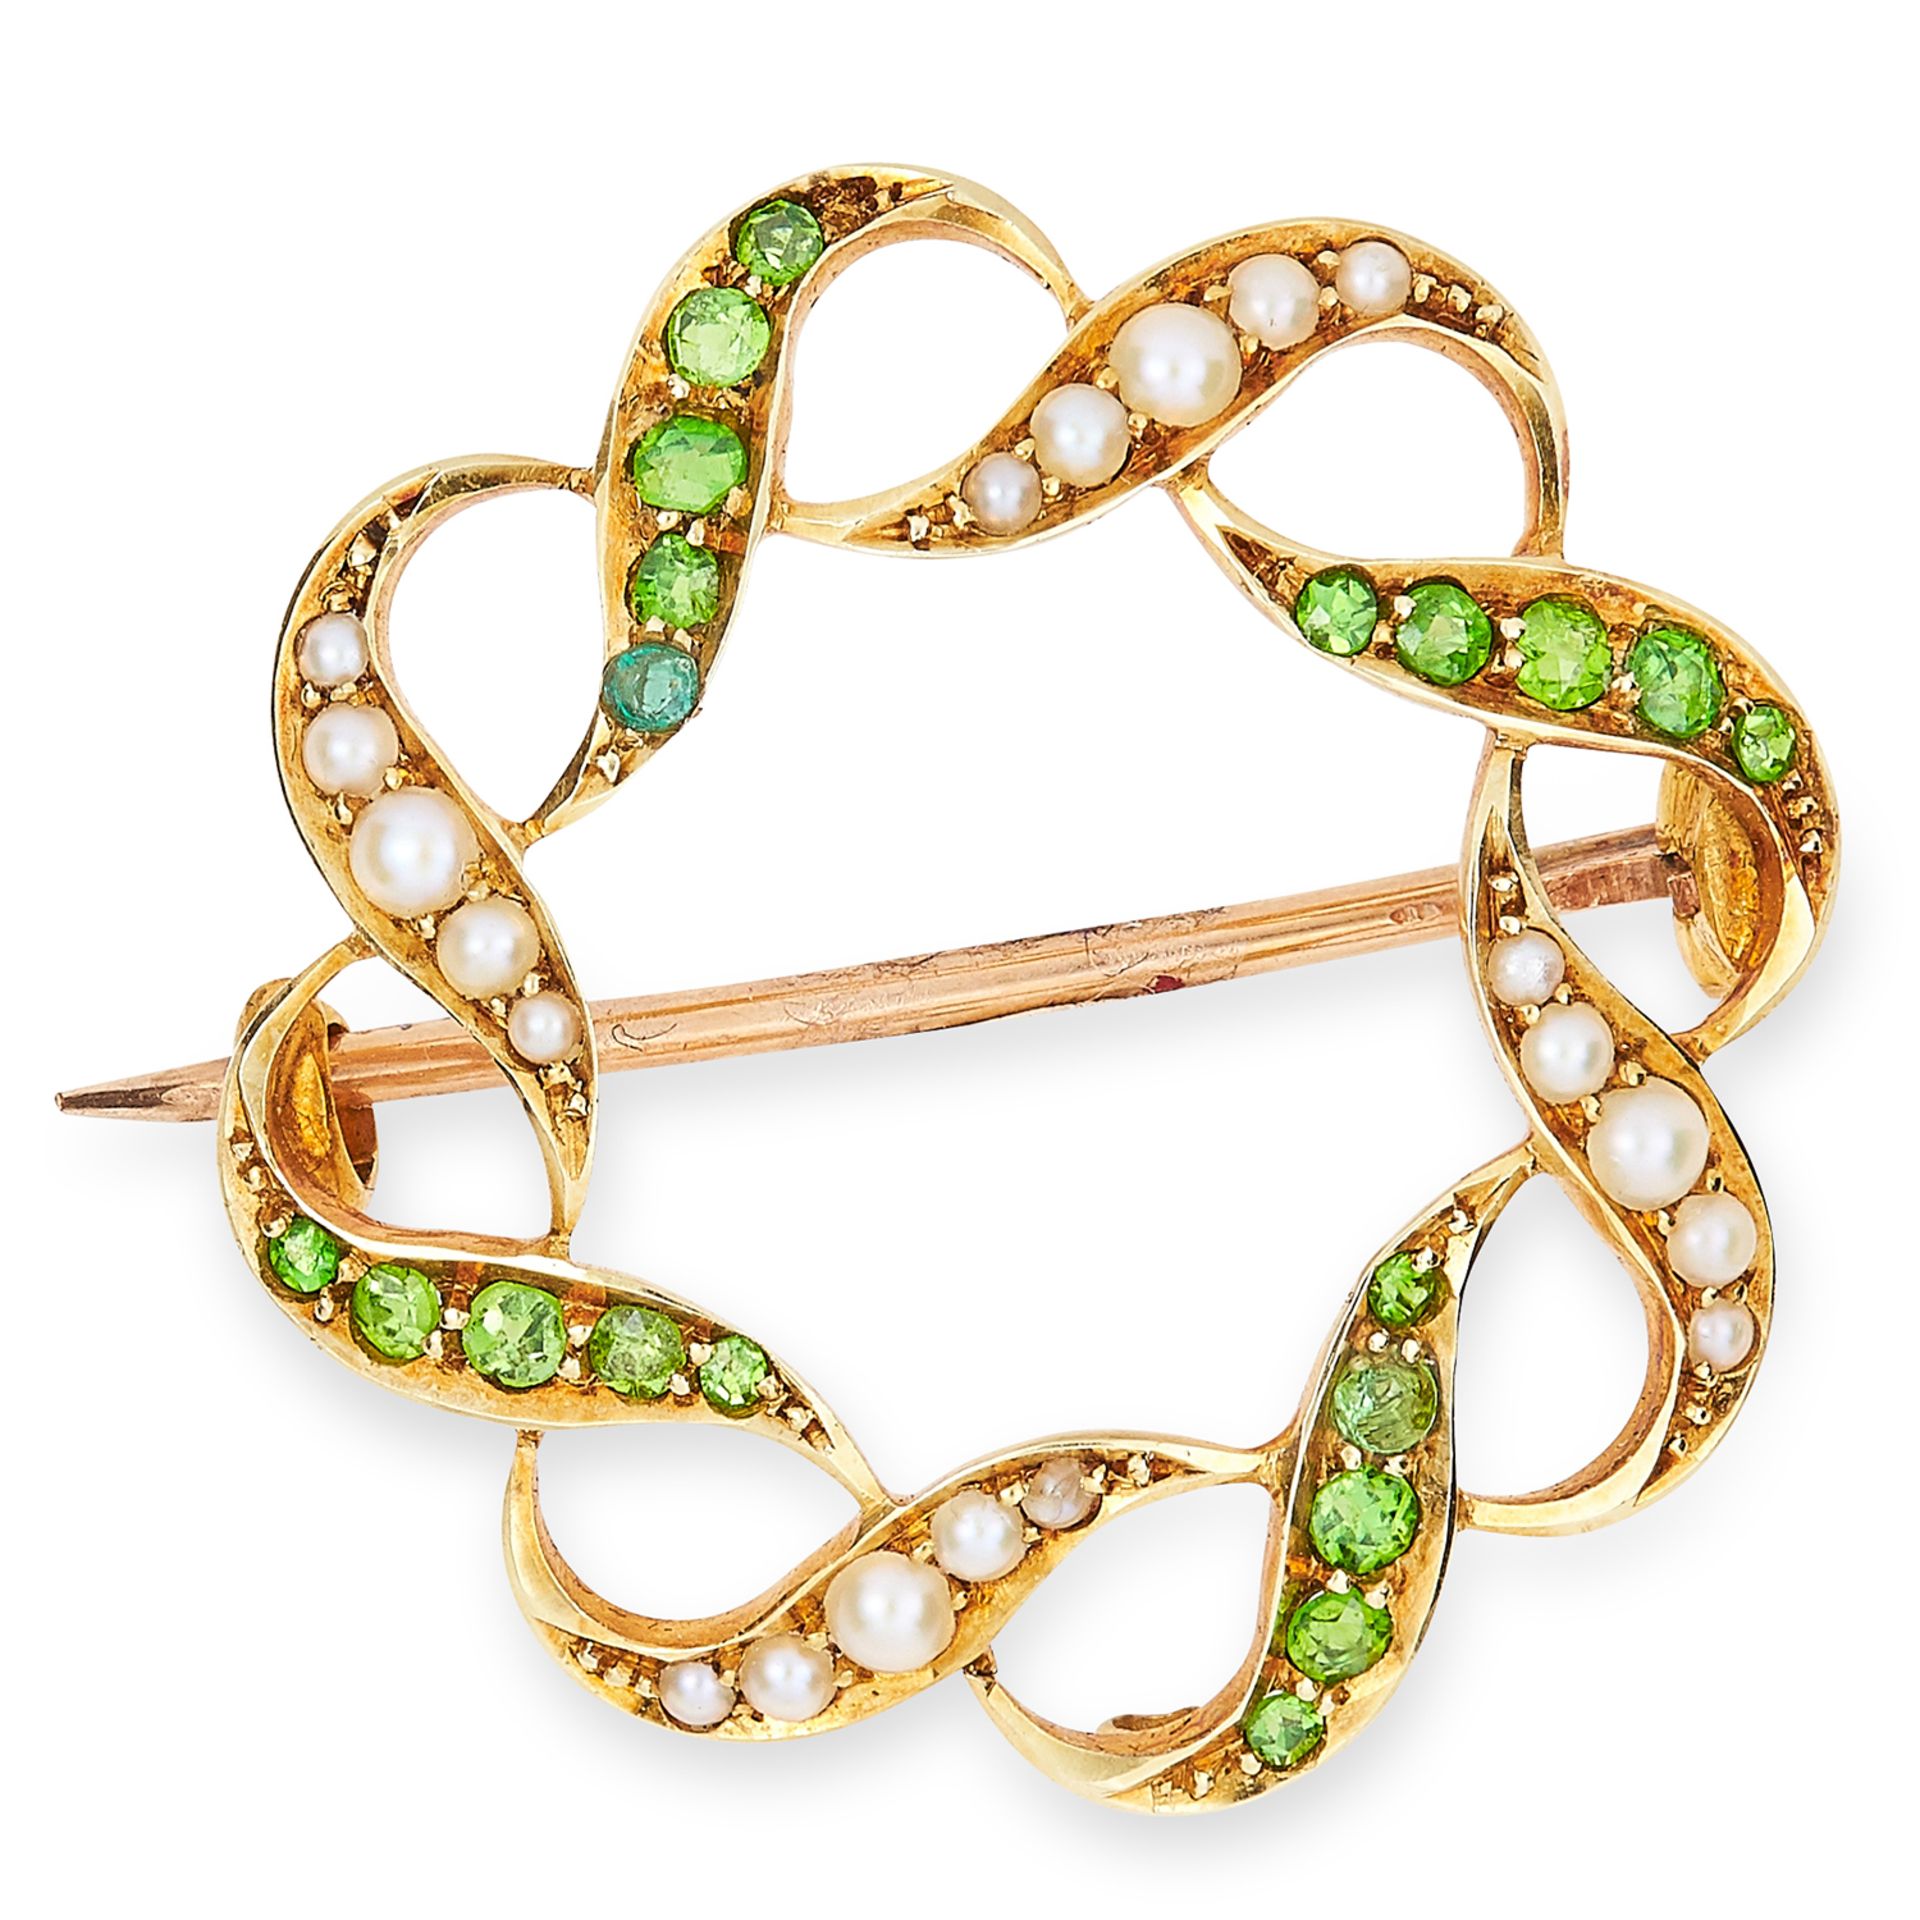 ANTIQUE PEARL AND PERIDOT BROOCH in 15ct yellow gold, the open framework is set with alternating